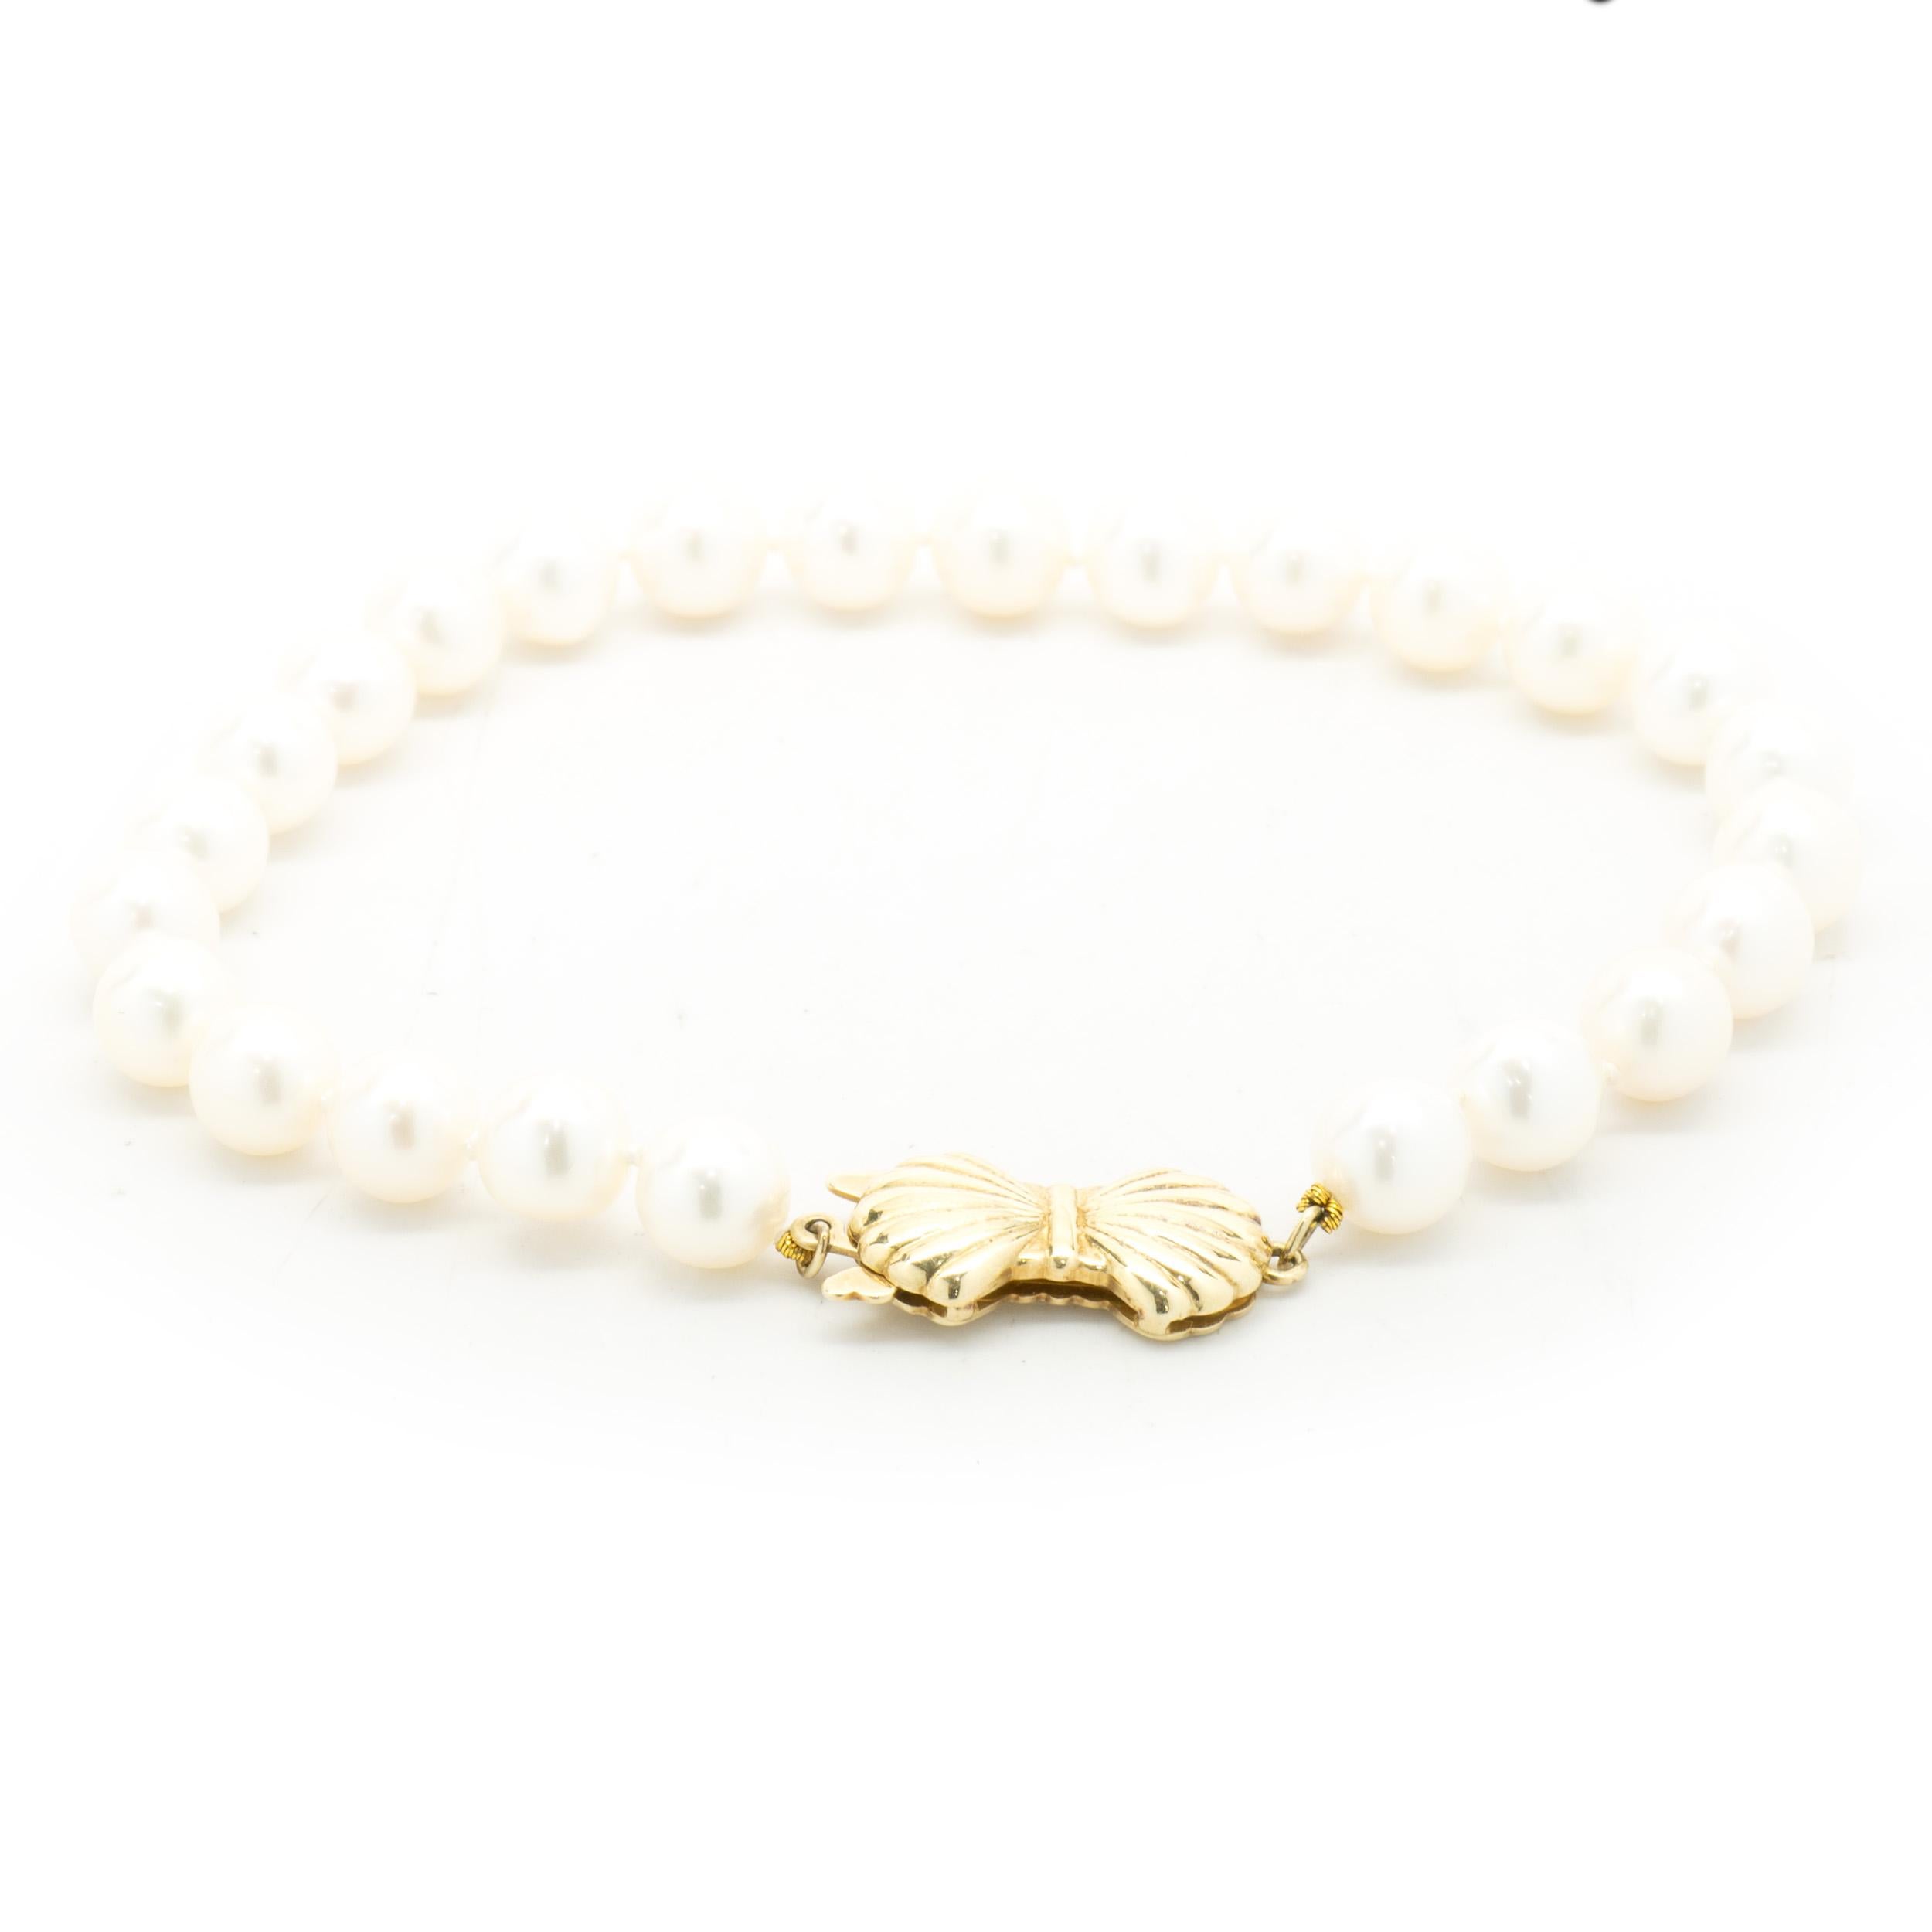 Designer: mikimoto
Material: 14K yellow gold
Dimensions: bracelet will fit up to a 7-inch wrist
Weight: 11.21 grams